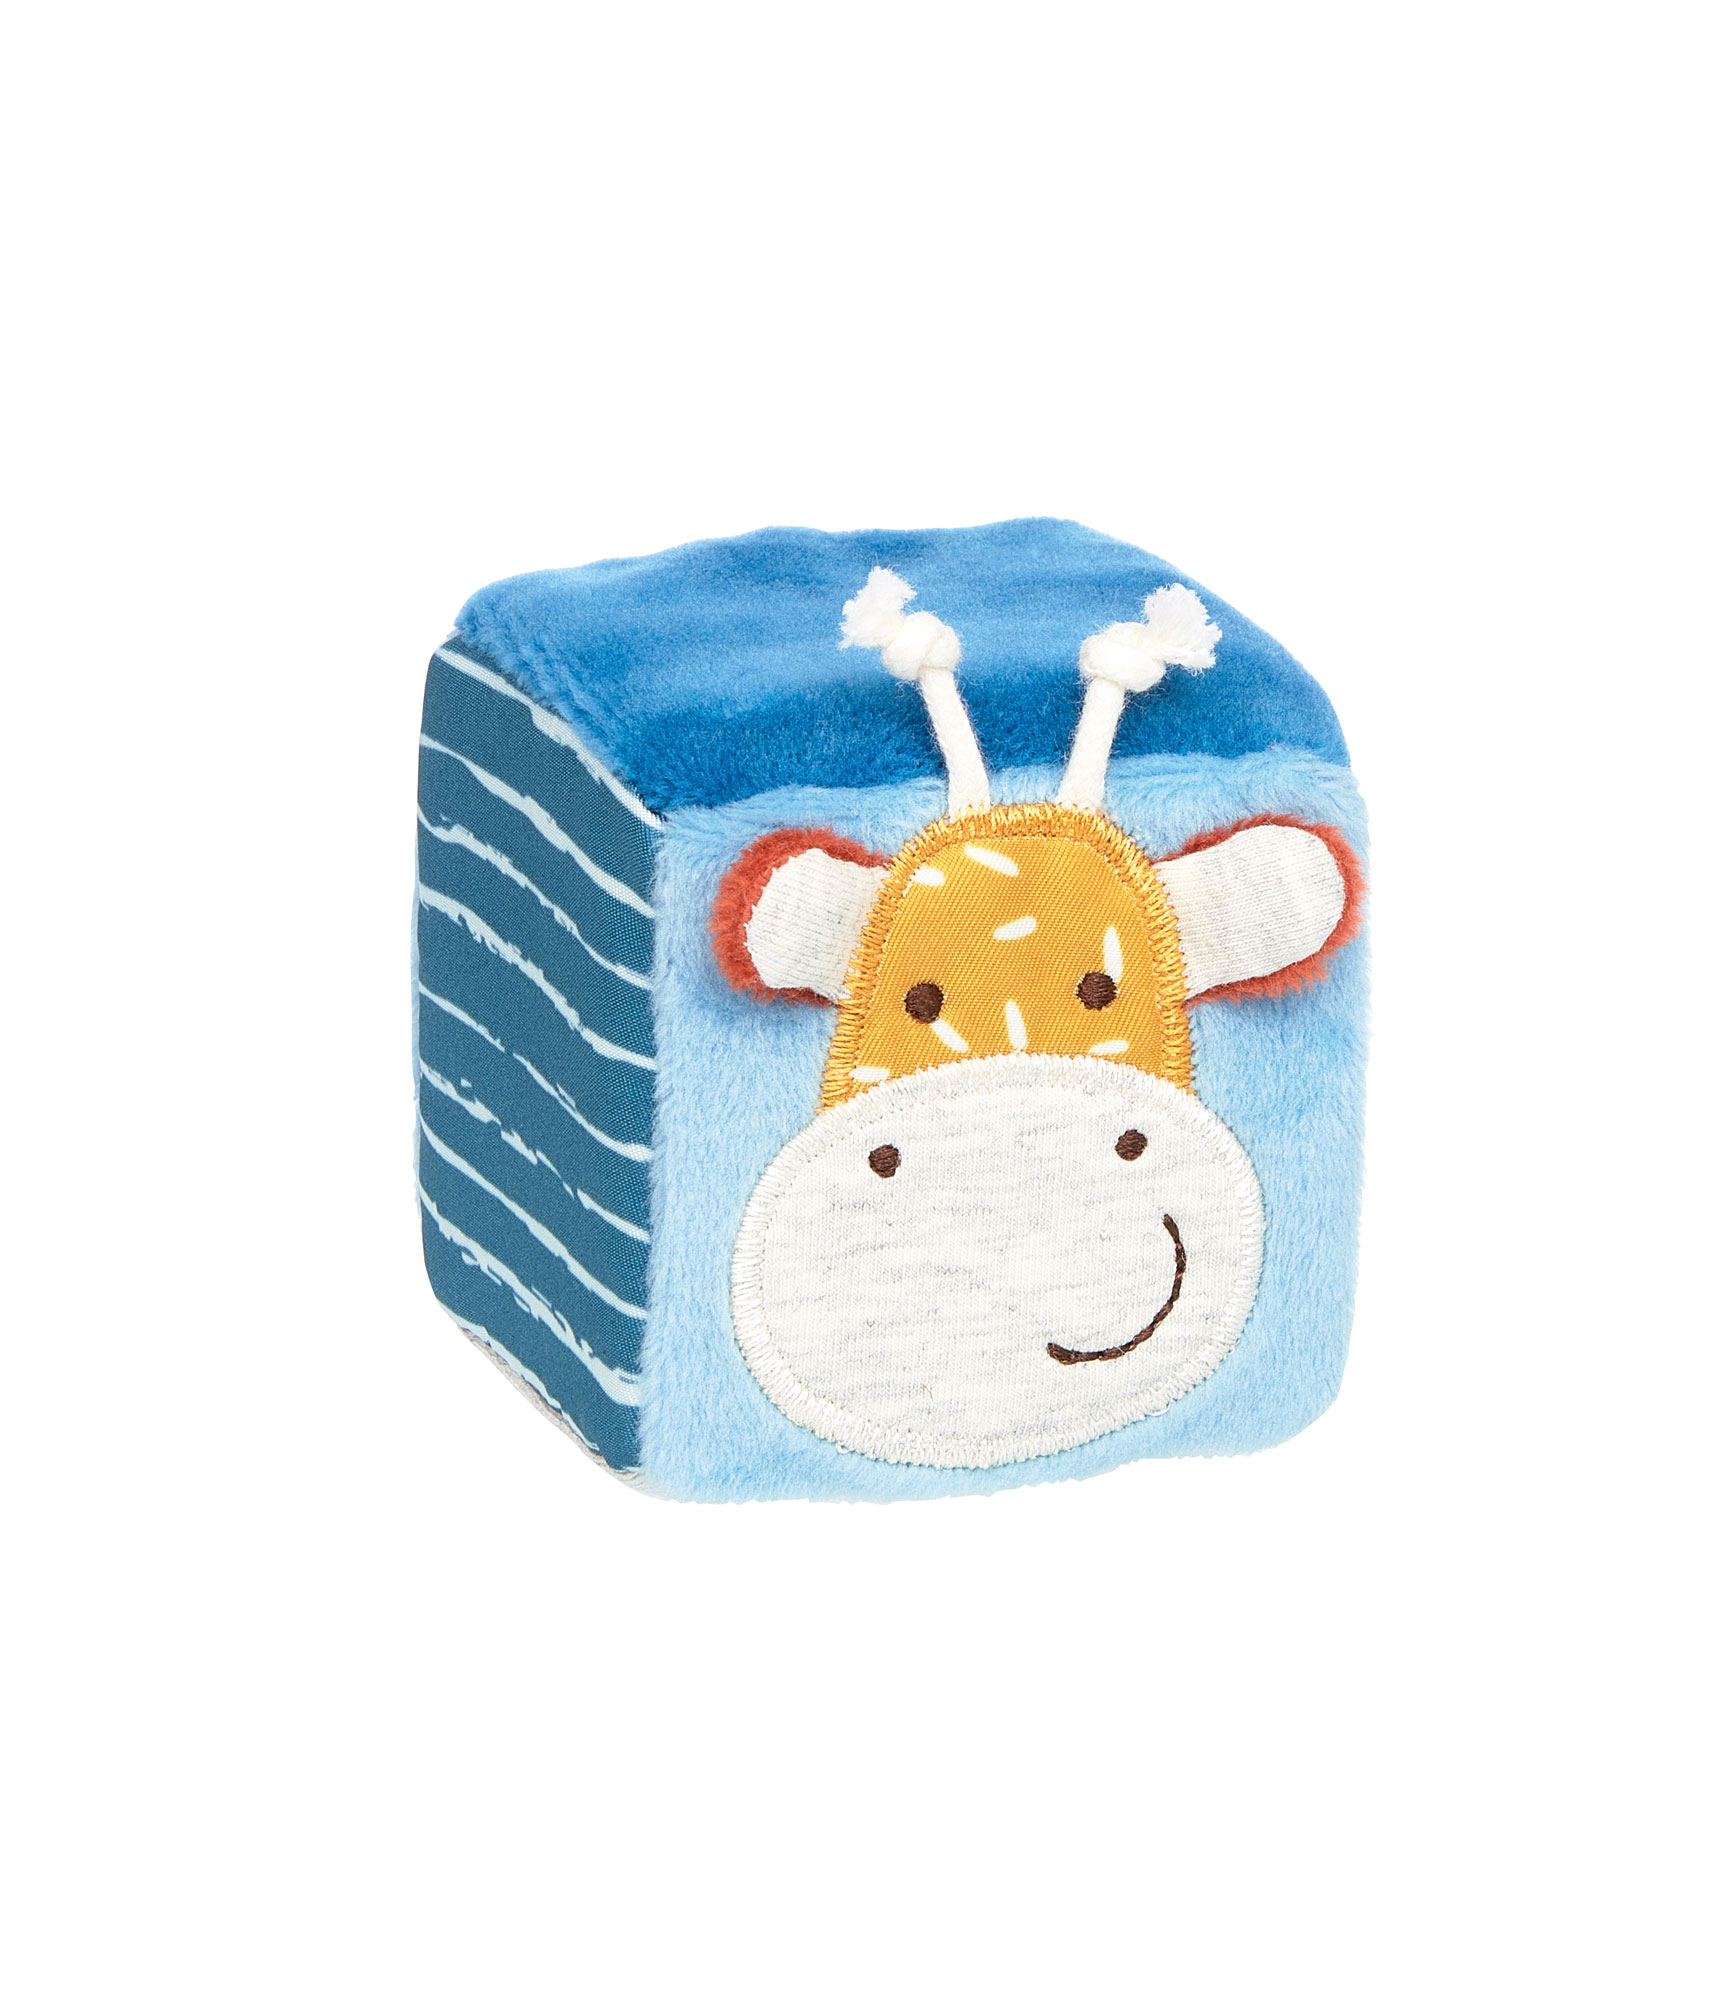 Baby soft toy cube dice set with rattle,squeaker, mirror